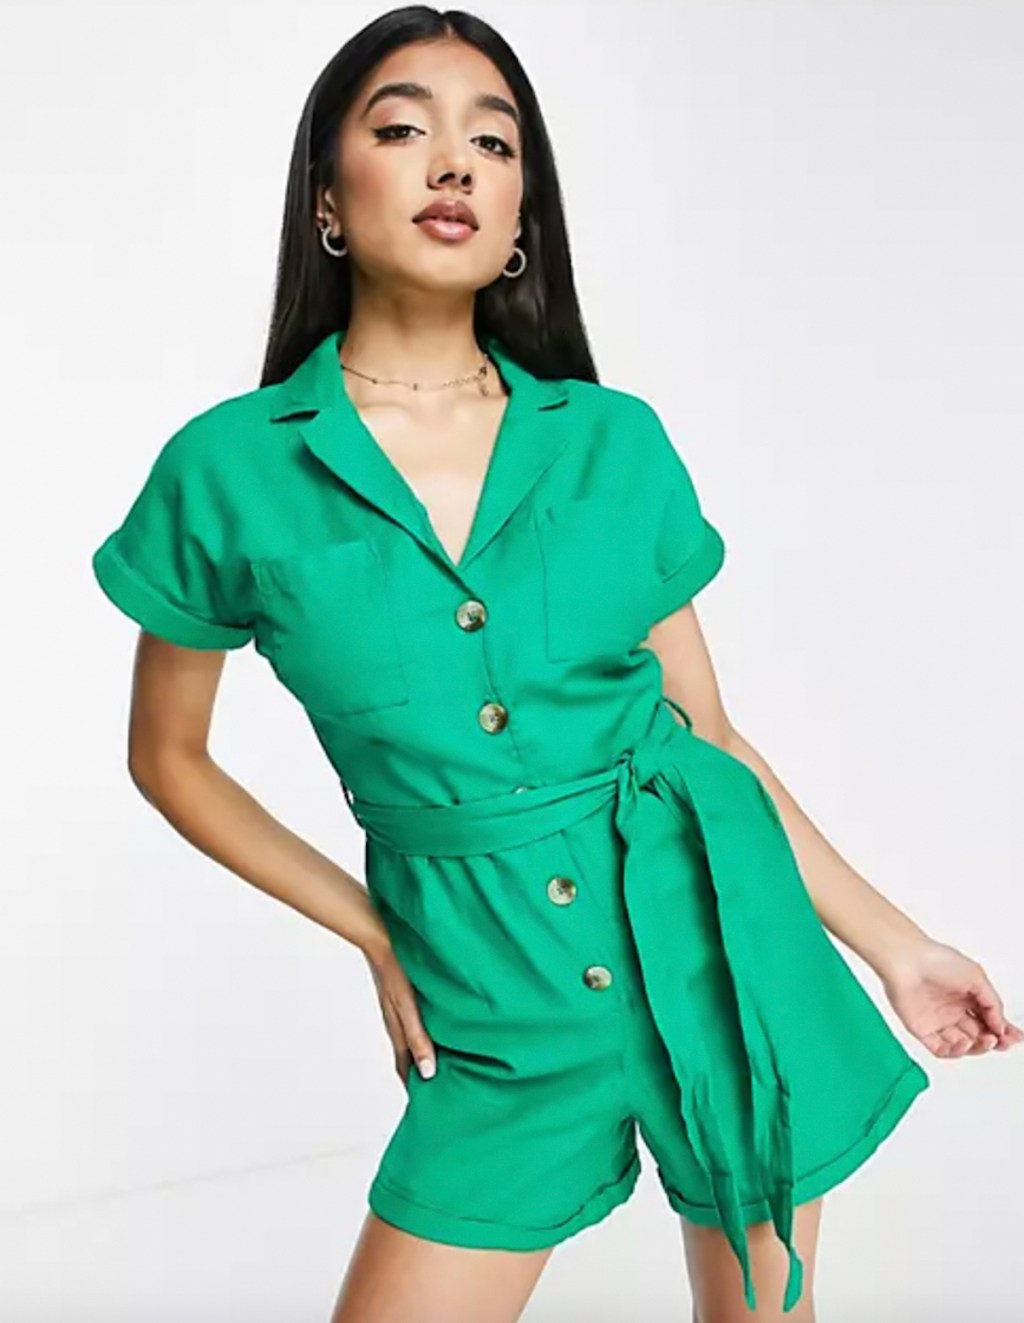 stock photo of woman wearing bright green utility romper